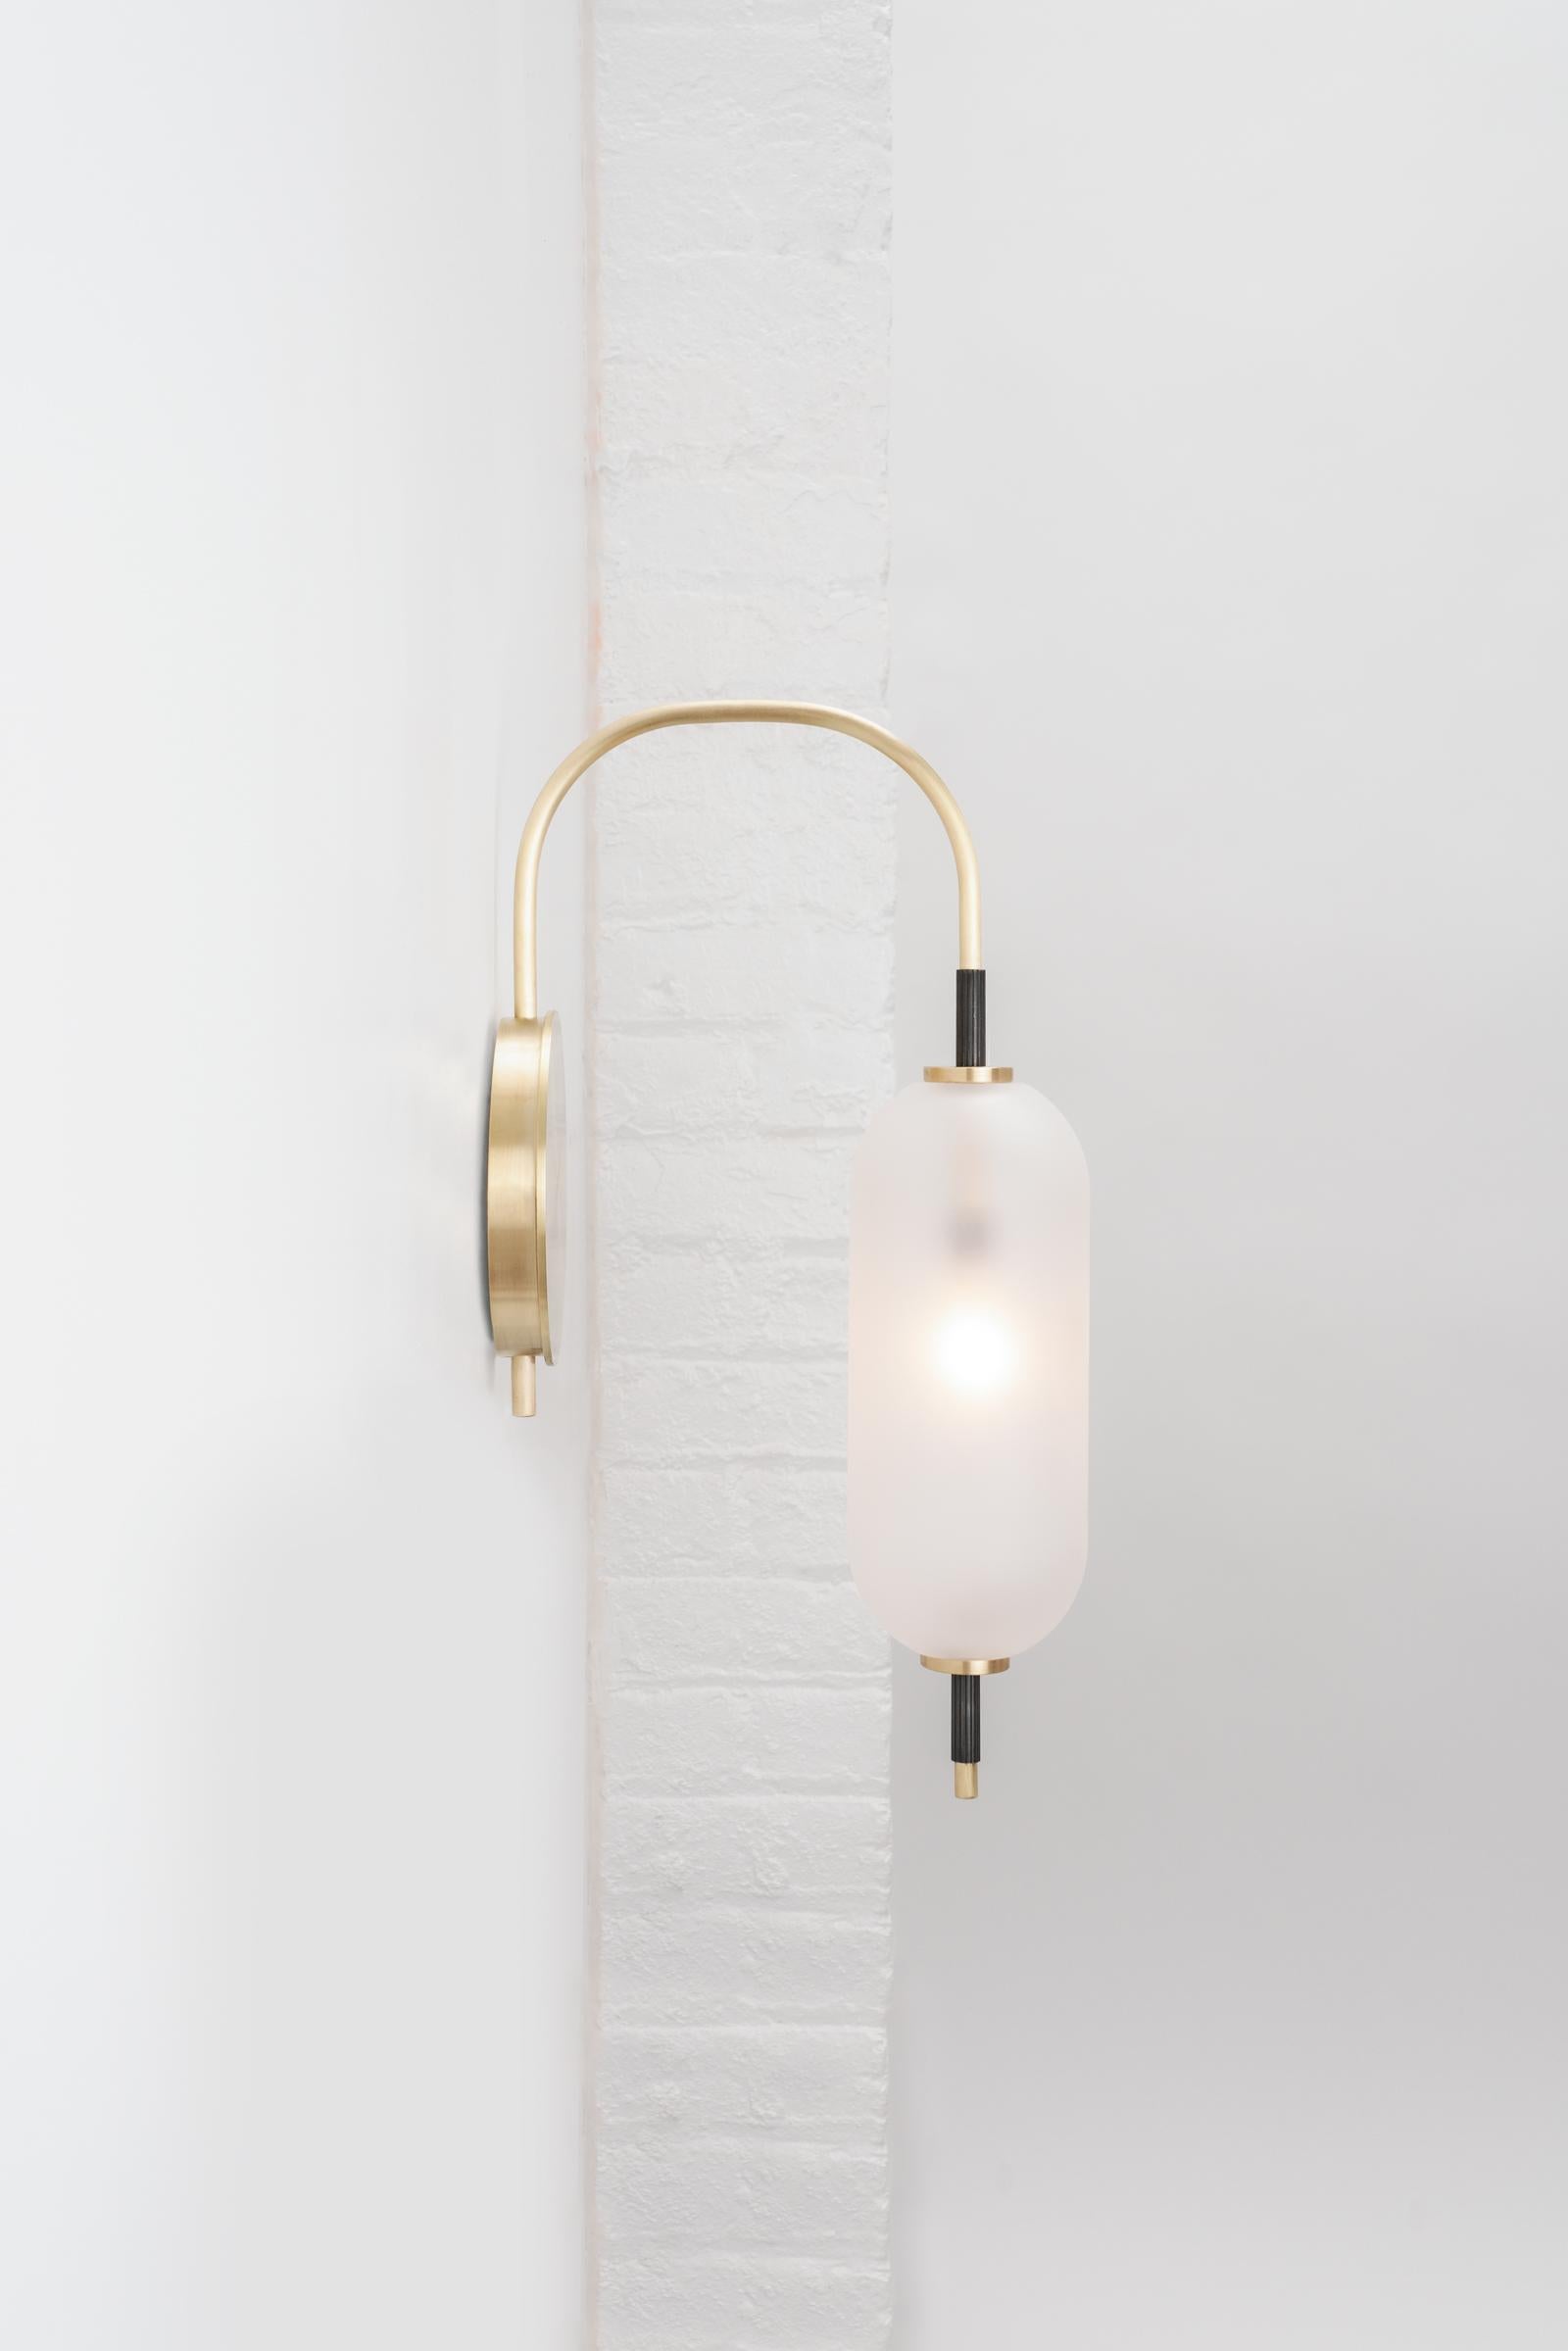 A jewel-like sconce composed of a bent brass stem with sandblasted glass orbs that seem to pierce through them. The bulb inside the glass orb emits a defused glow from the center of its core. 

UL listed.